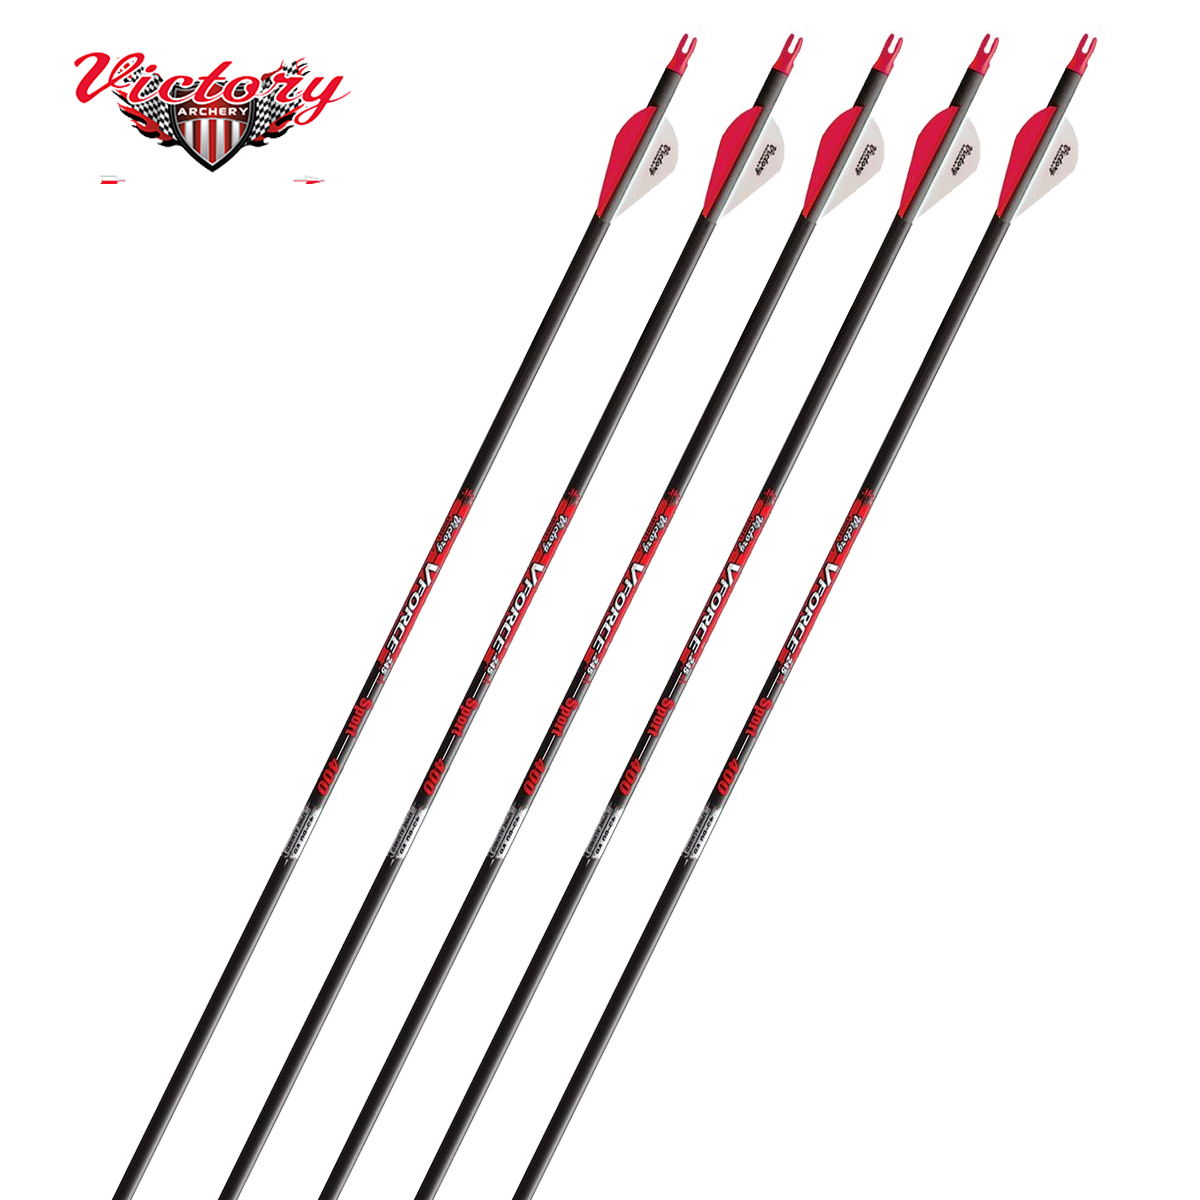 45/60 2" Vanes- 6 pack- Cut to length FREE! Arrows Victory V-Force Sport 400 